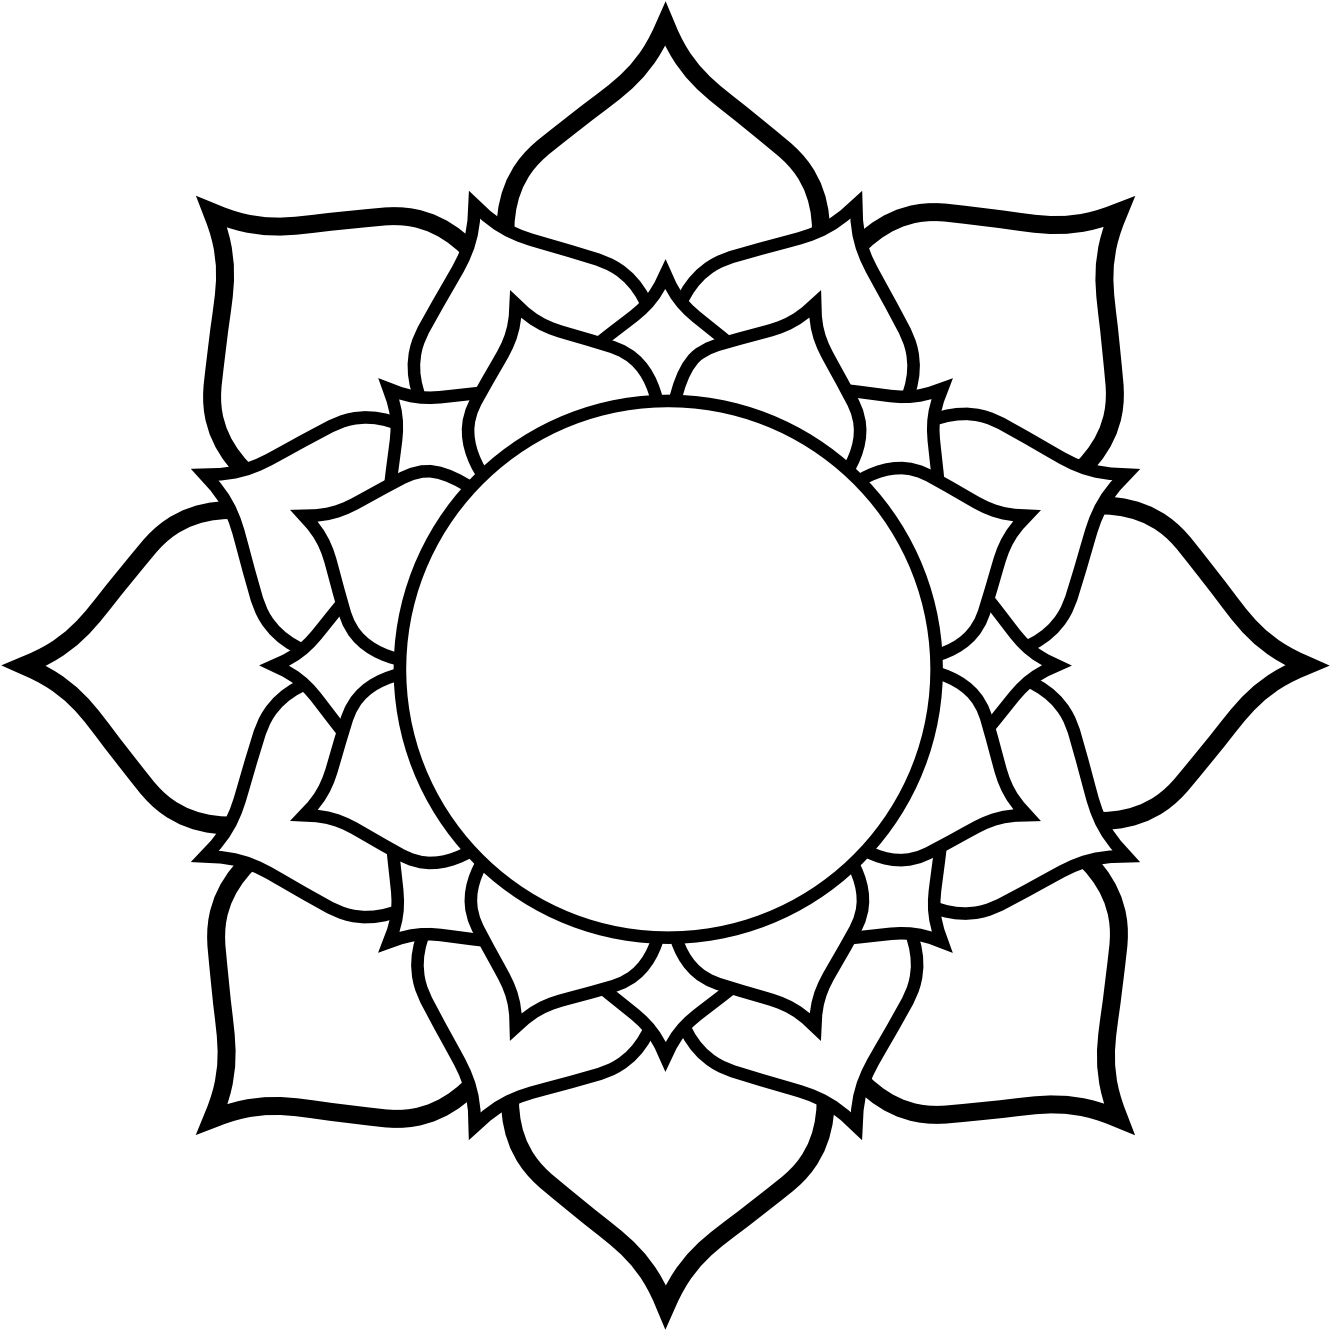 Lotus Flower Line Drawing - ClipArt Best